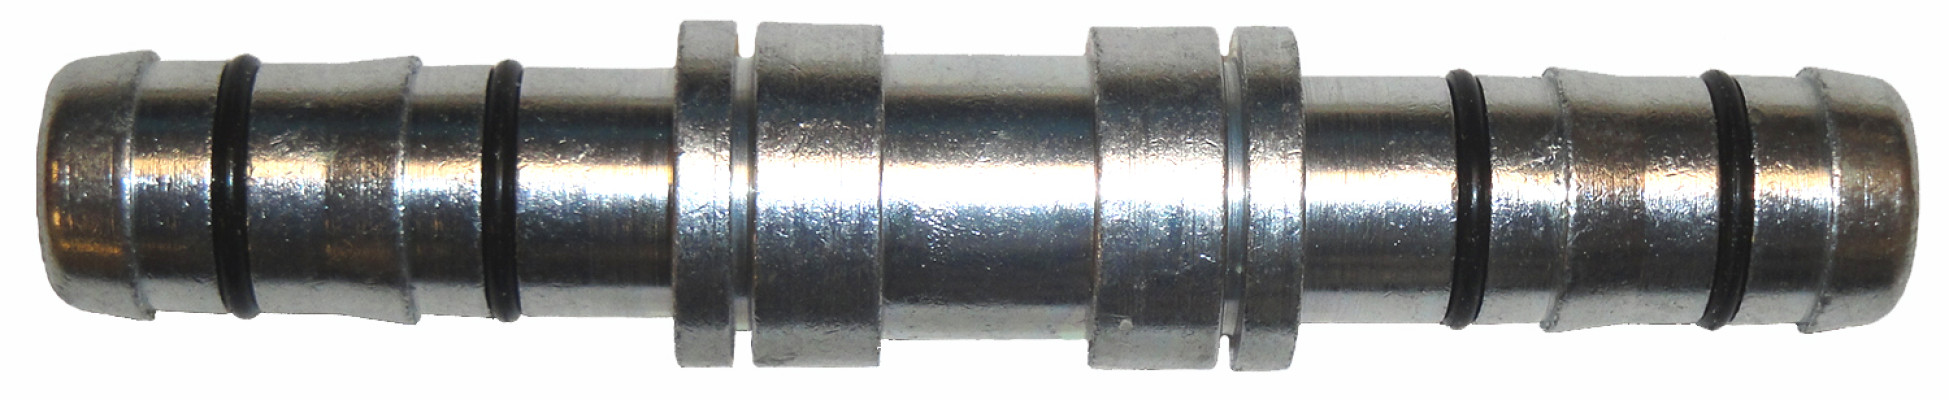 Image of A/C Refrigerant Hose Fitting from Sunair. Part number: FJ3045-1212S